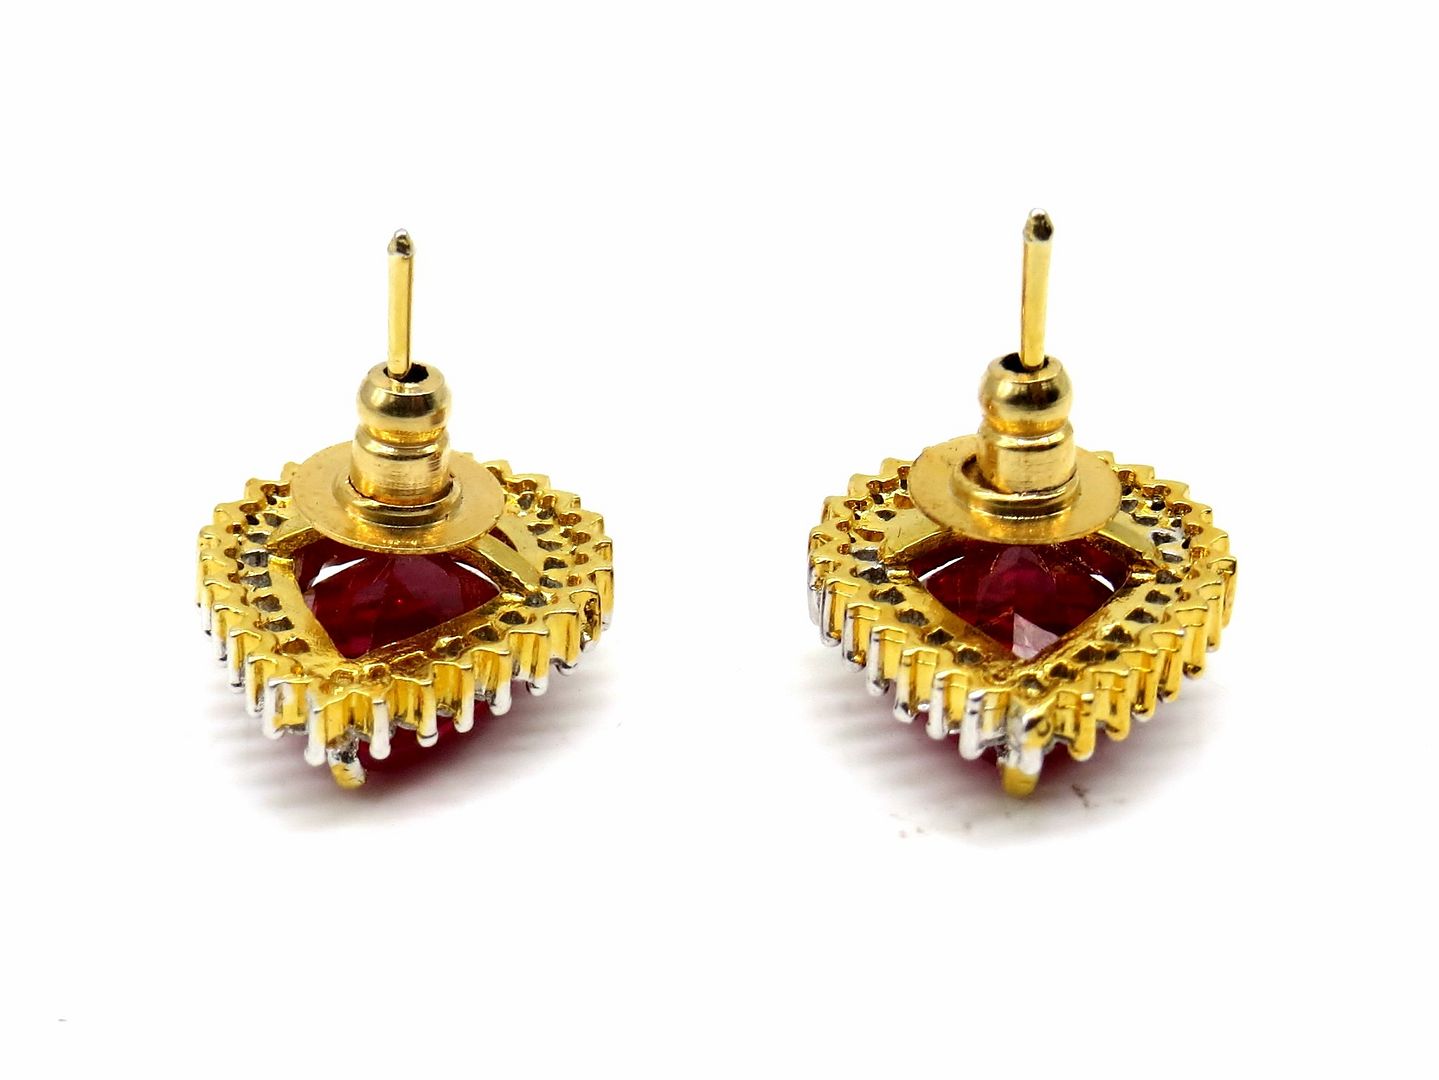 Jewelshingar Jewellery Gold Silver Plated Red Colour Earrings For Women ( 56266GJT )